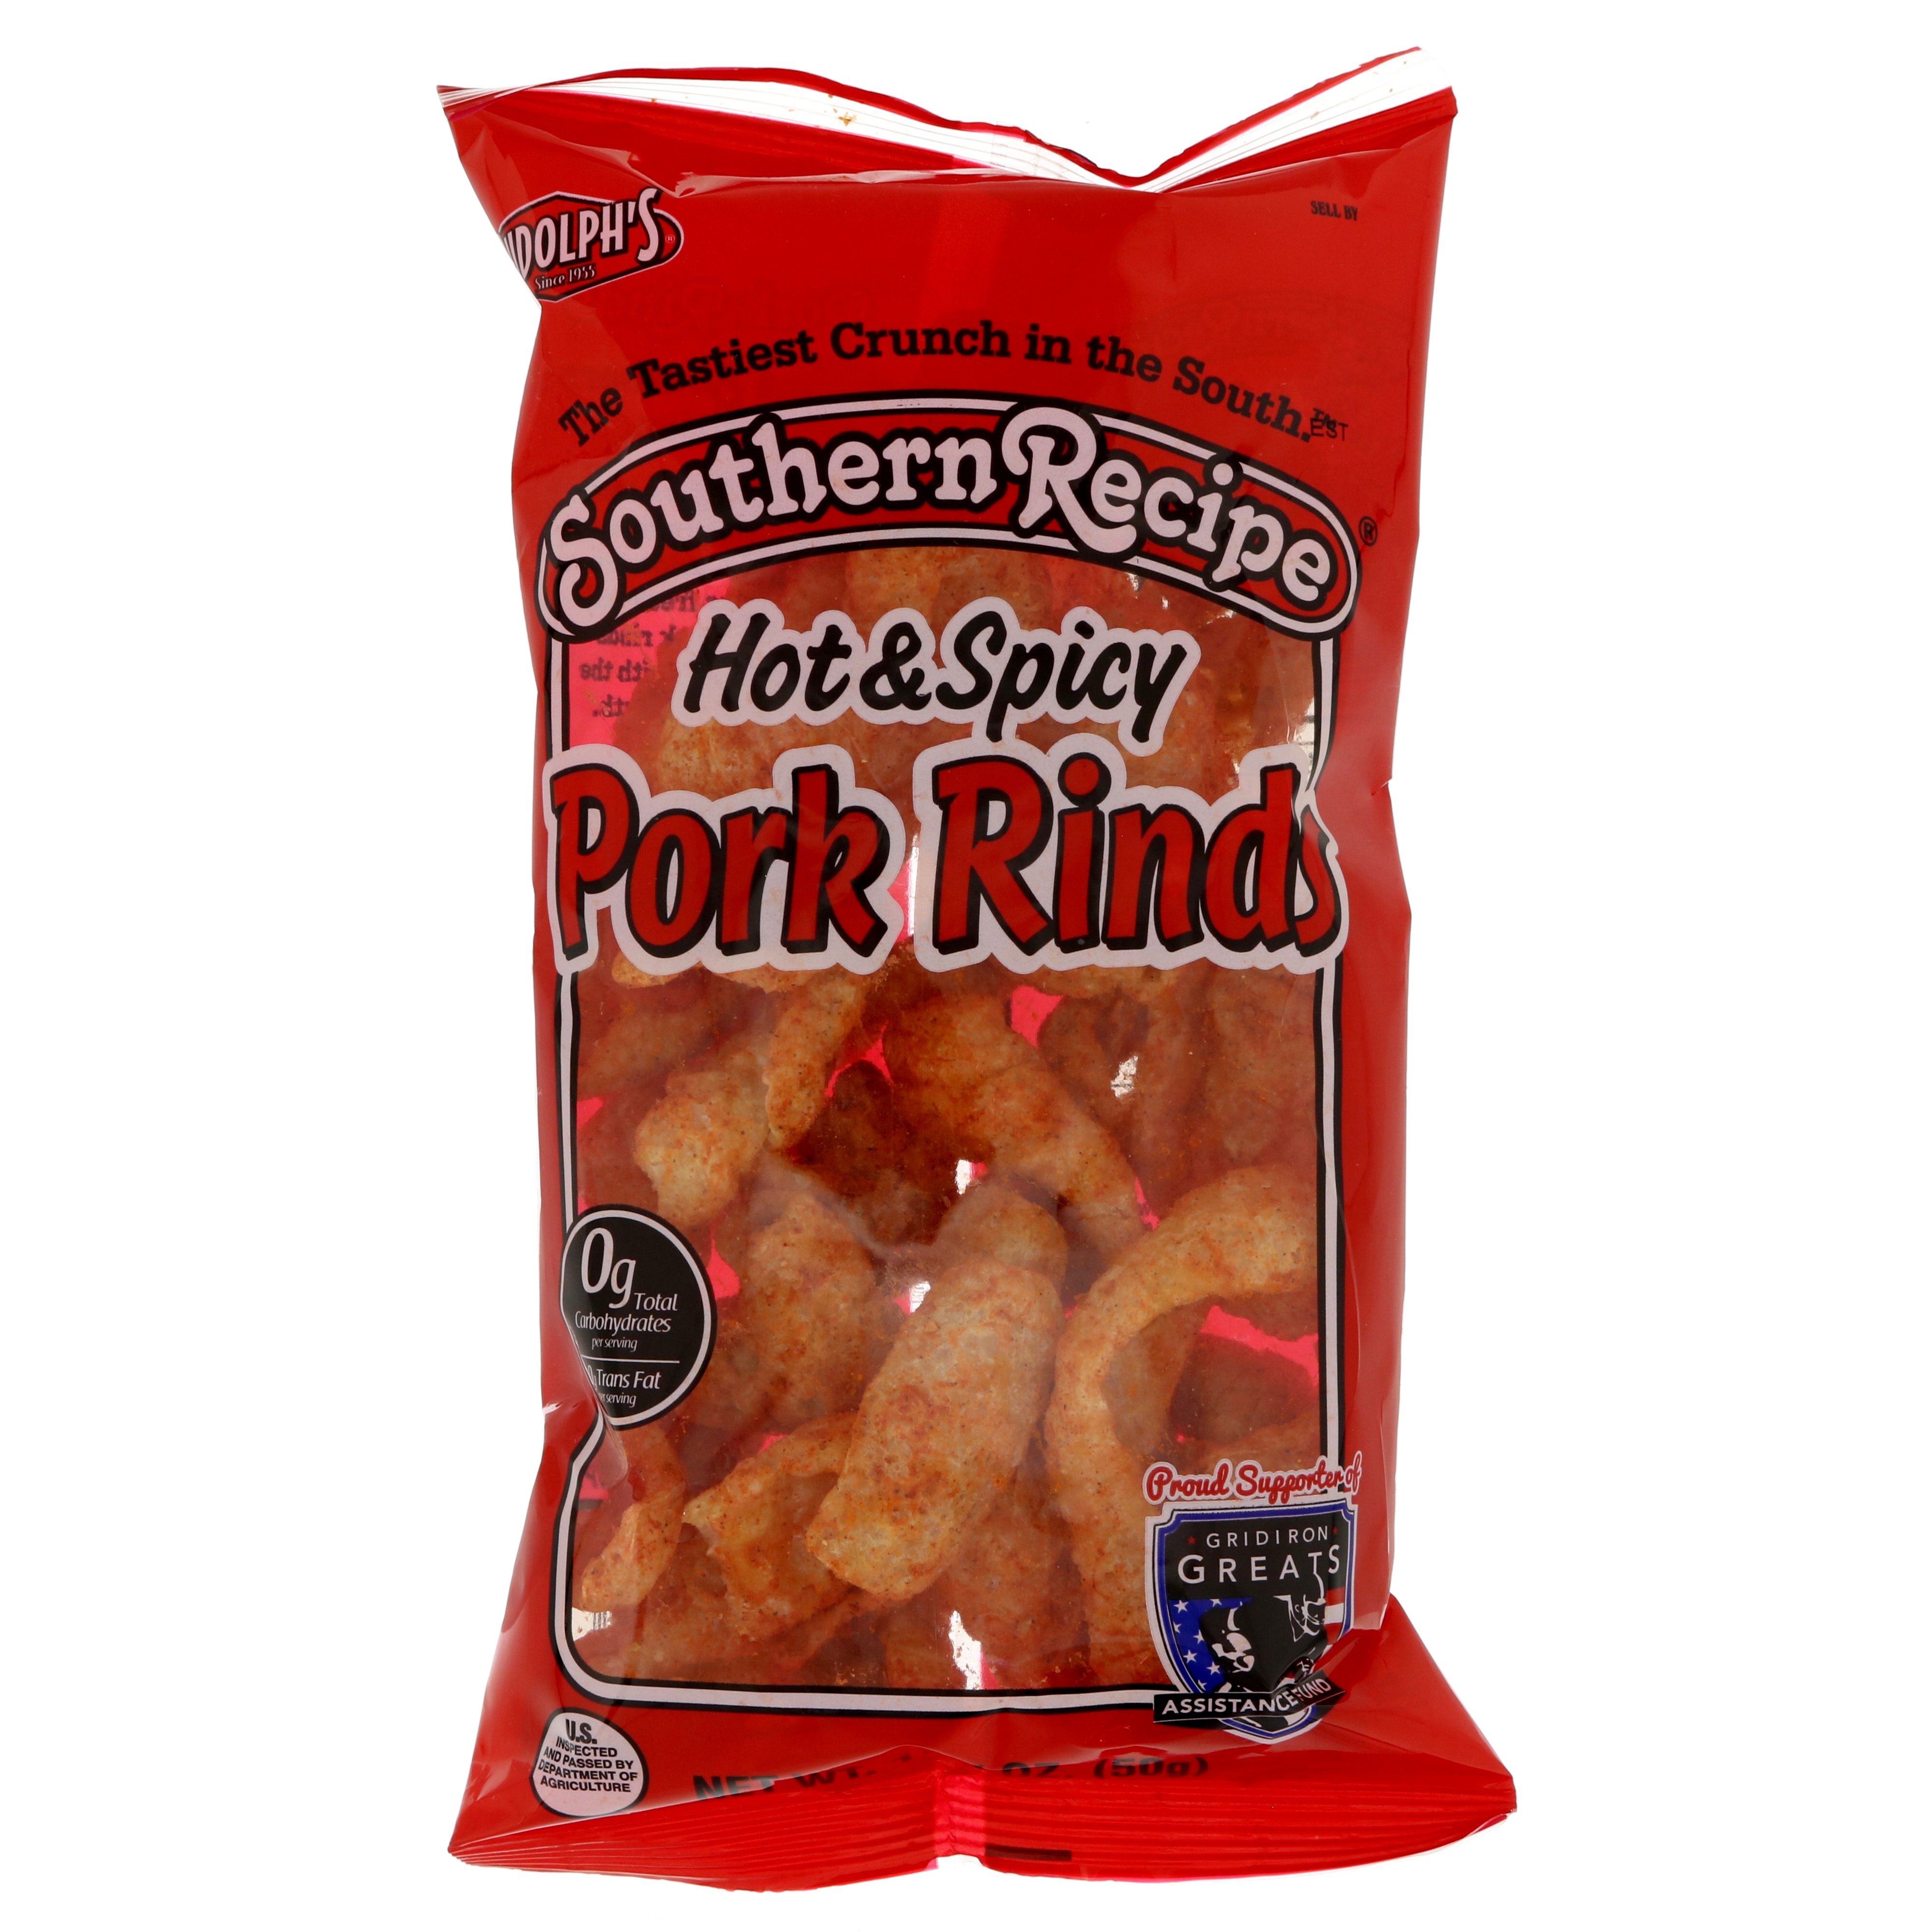 Southern Recipe Hot & Spicy Pork Rinds - Shop Chips at H-E-B